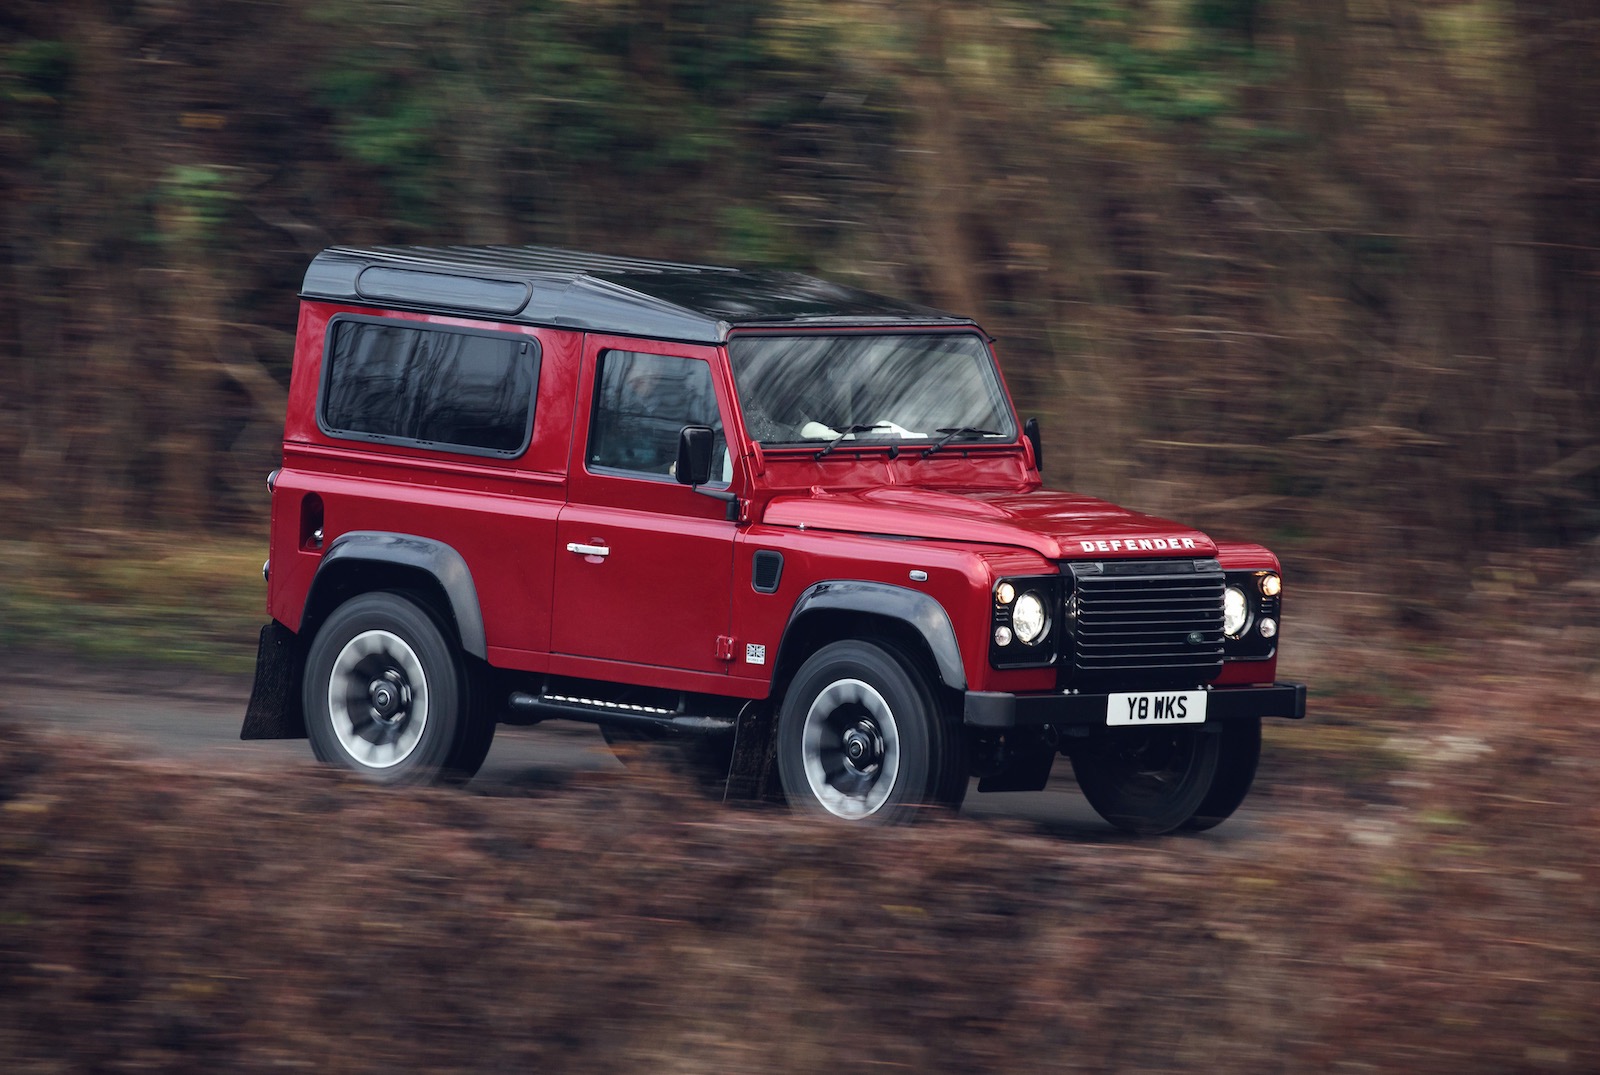 2018 Land Rover Defender Works V8 special edition announced